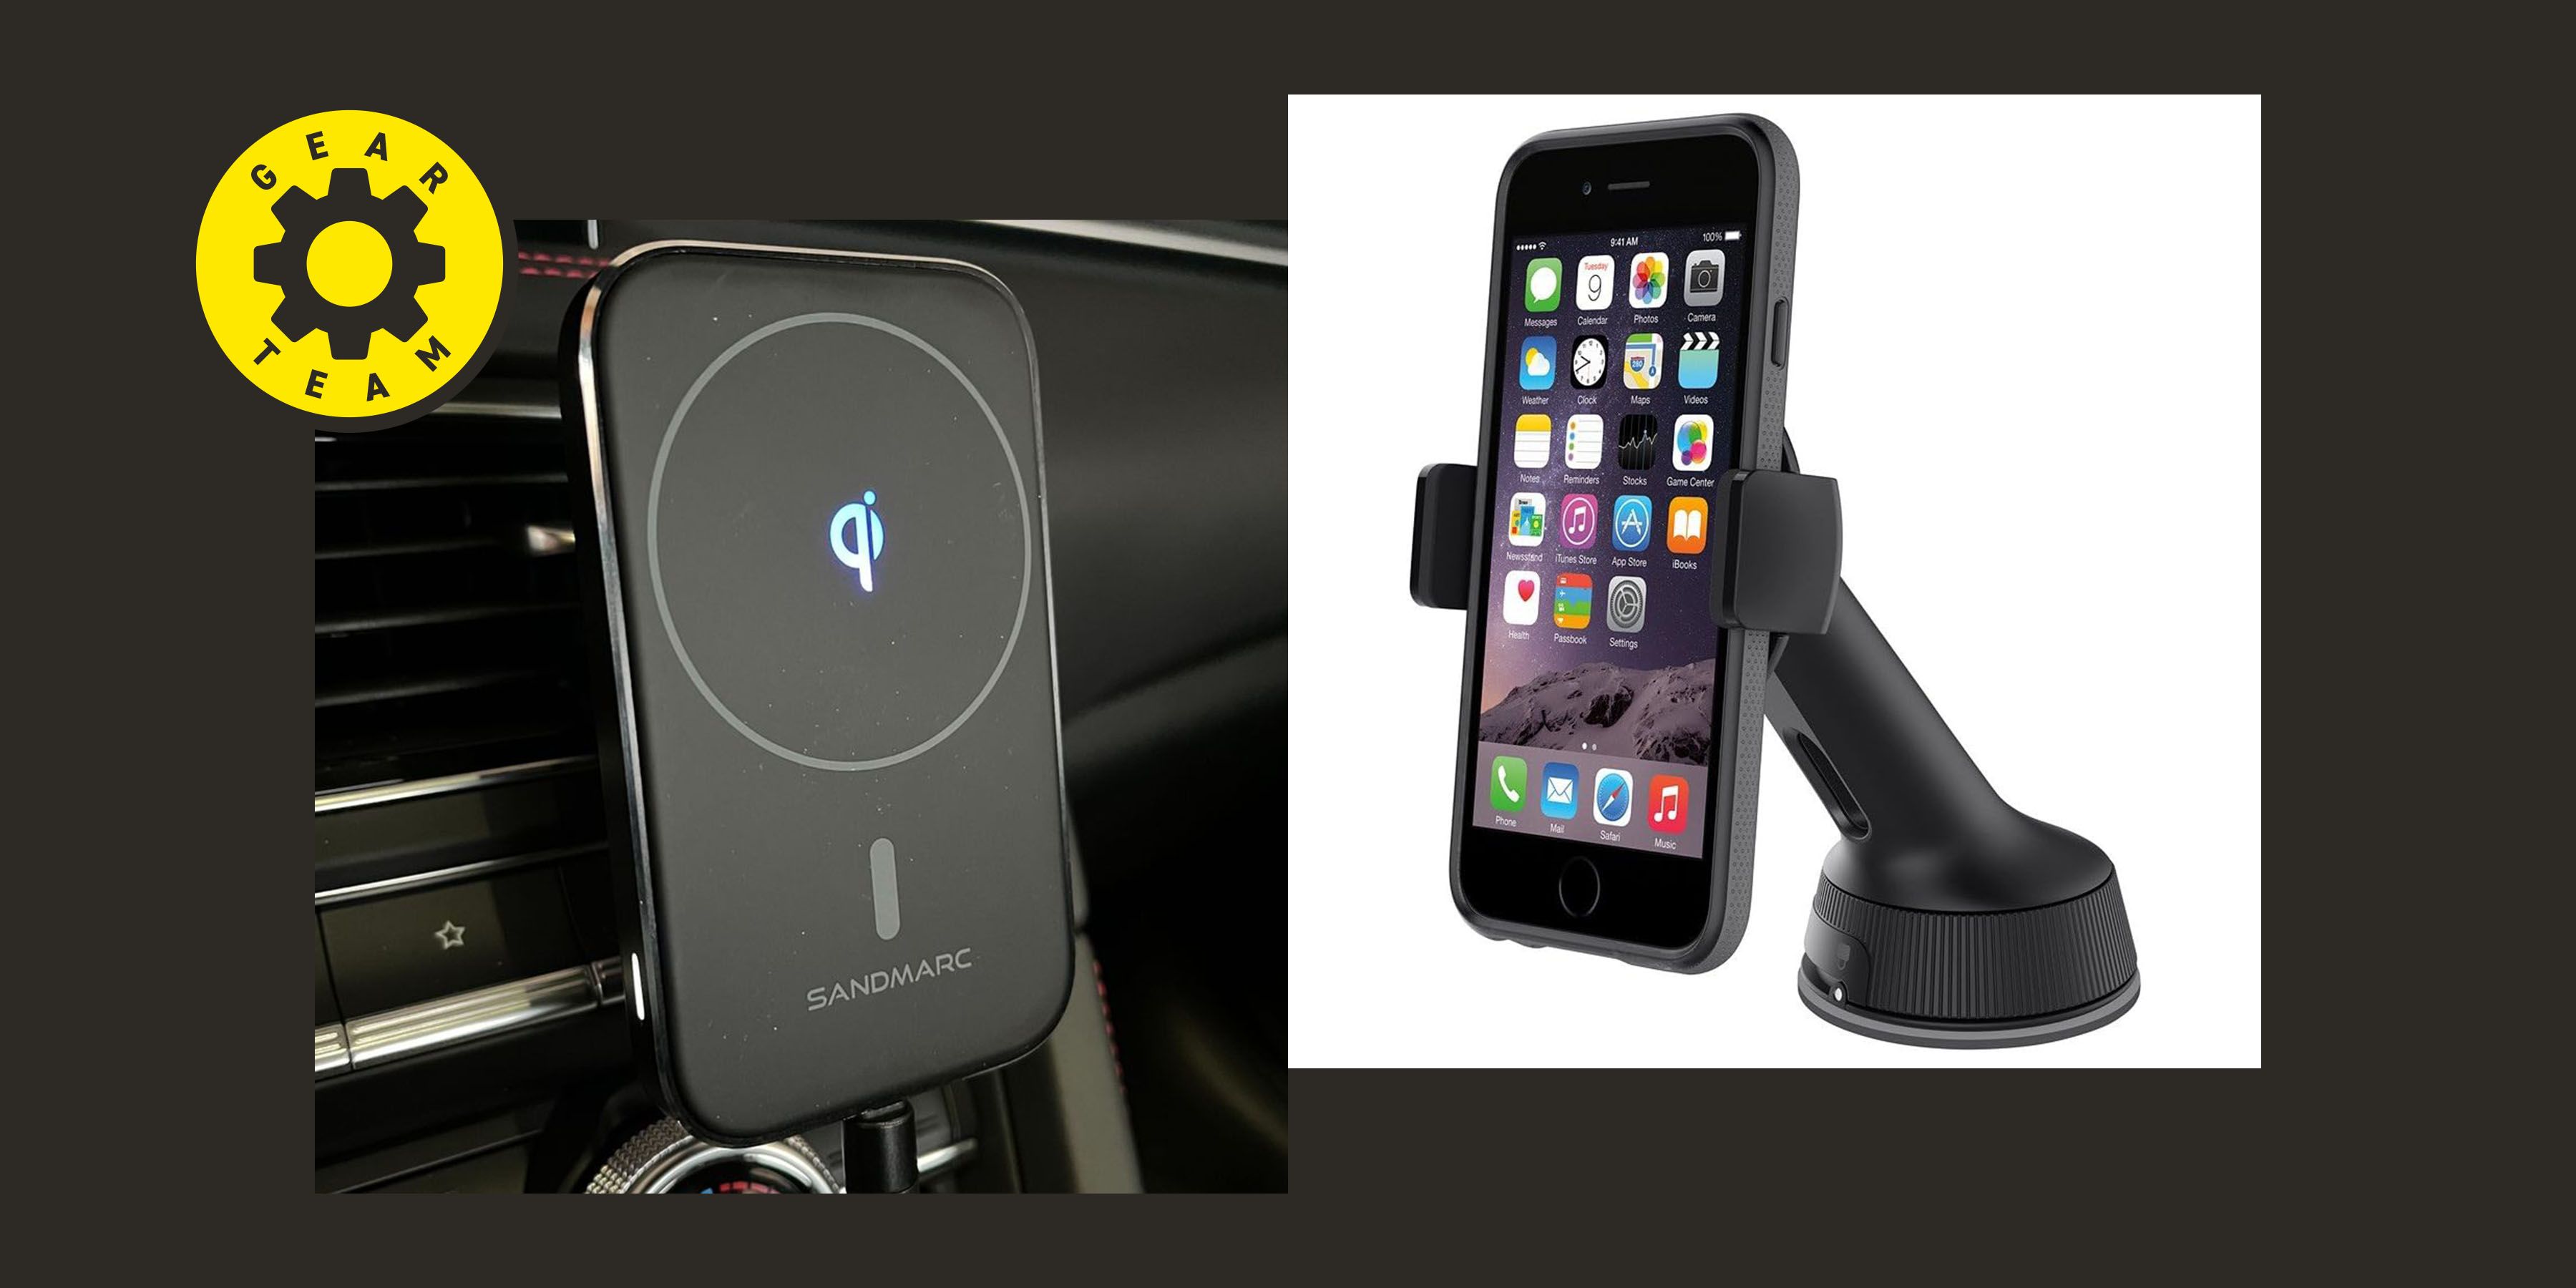 What are the different types of car phone holder?